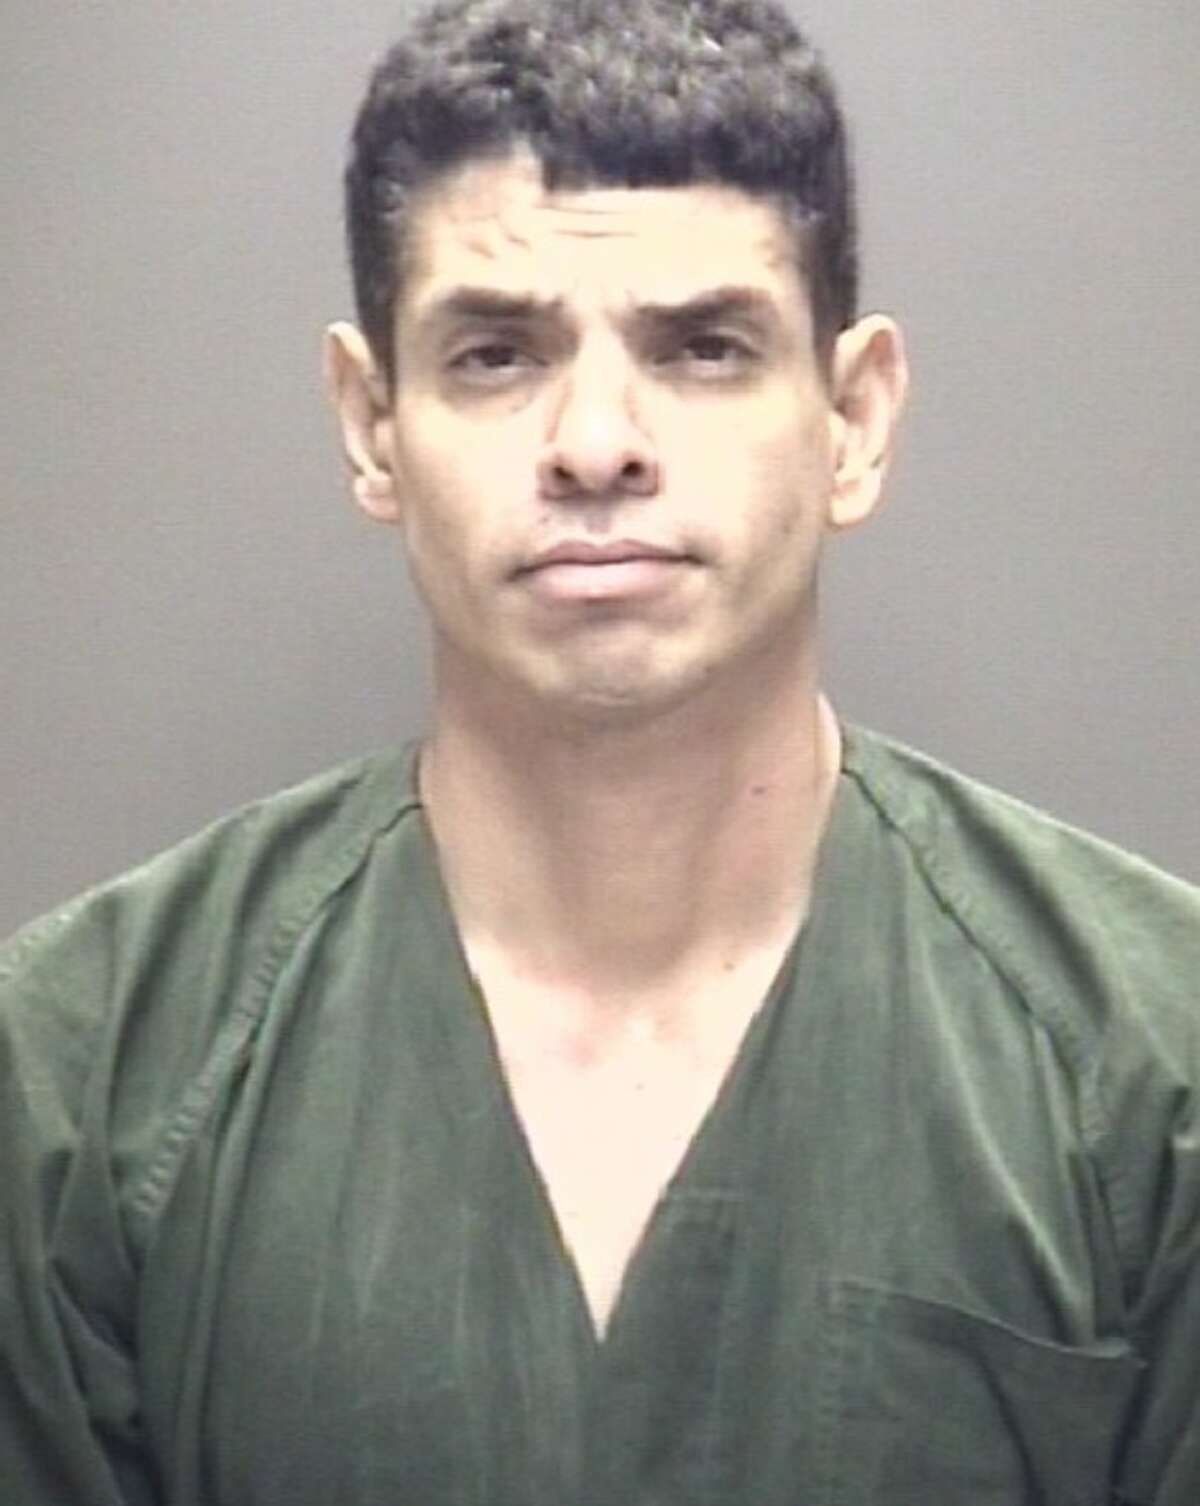 Joel Pena is charged with felony possession of a controlled substance in Galveston County.